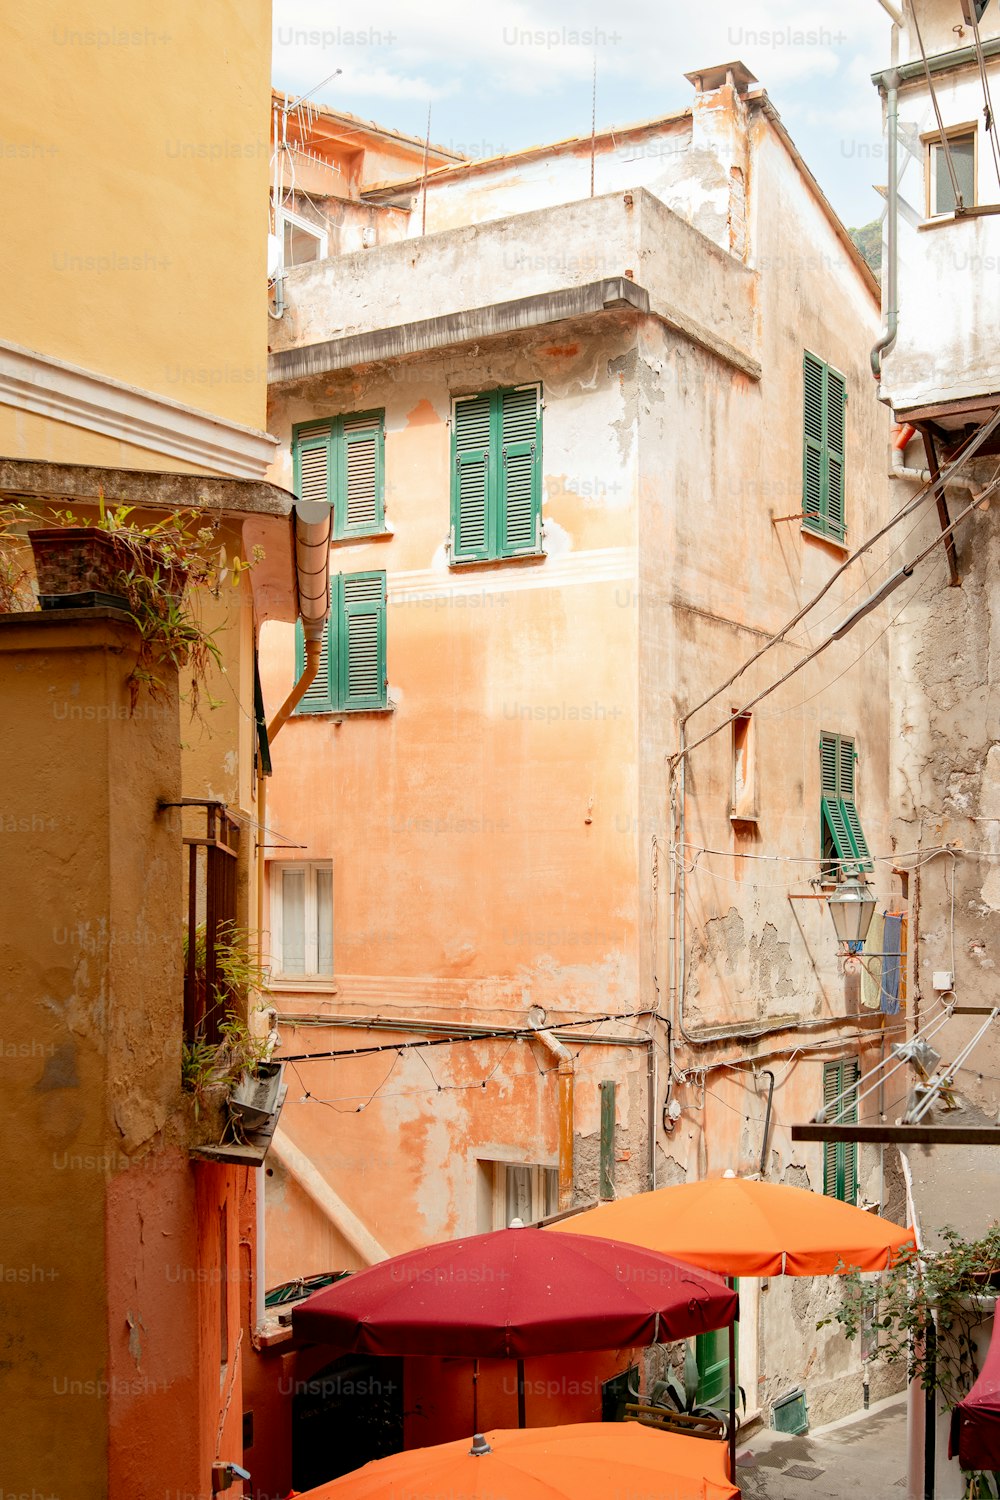 a couple of orange umbrellas sitting in front of a building